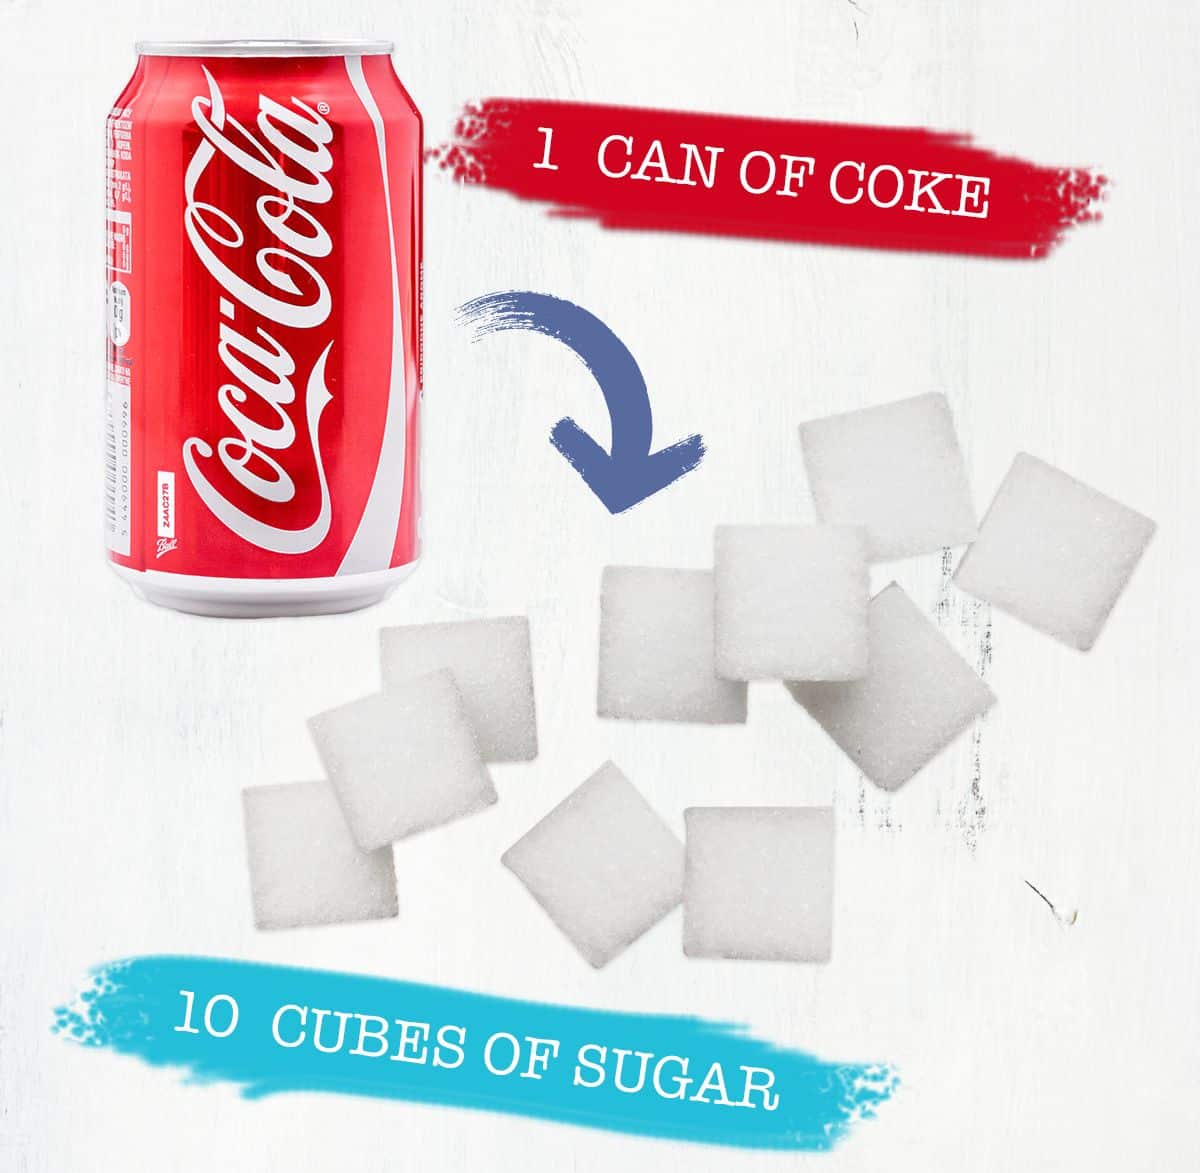 How Much Sugar In A Can Of Coke